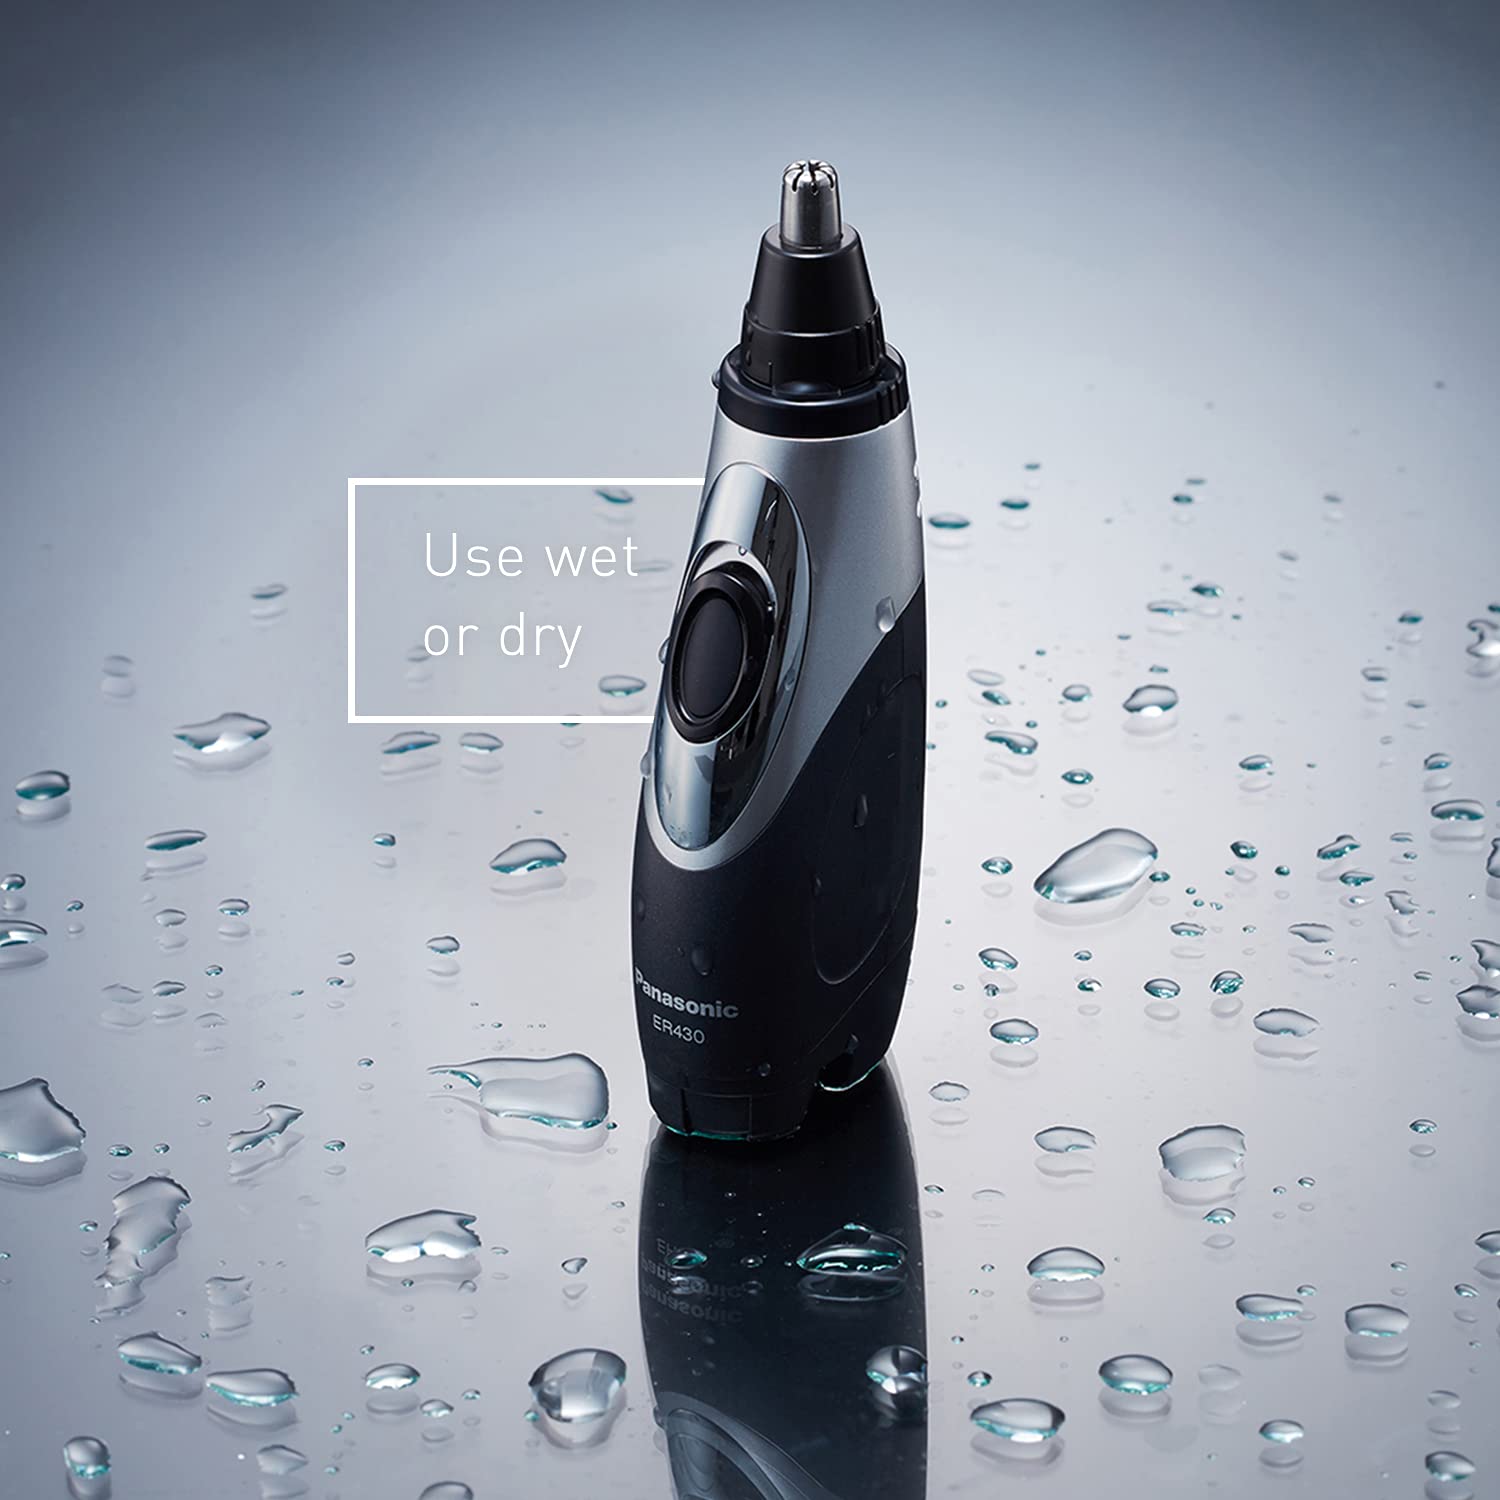 Panasonic ER430K Nose, Ear and Facial Hair Trimmer Wet/Dry with Vacuum Cleaning System : Beauty & Personal Care